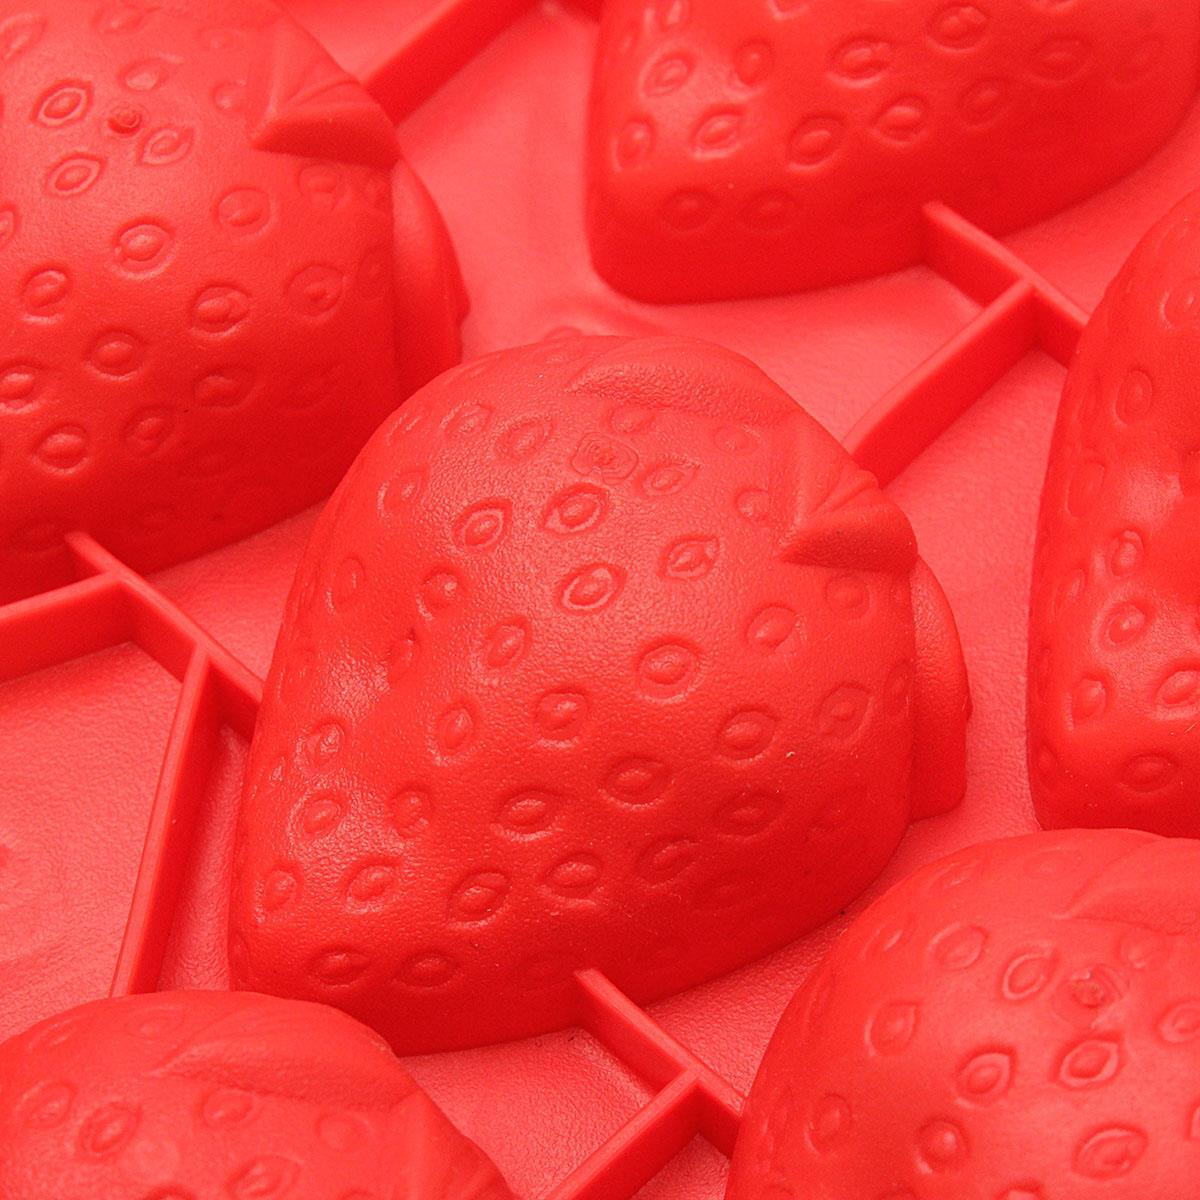 Set 3 Strawberry berry Mold silicone Ice cube Tray Chocolate Soap Candy Candle Unbranded Does Not Apply - фотография #8